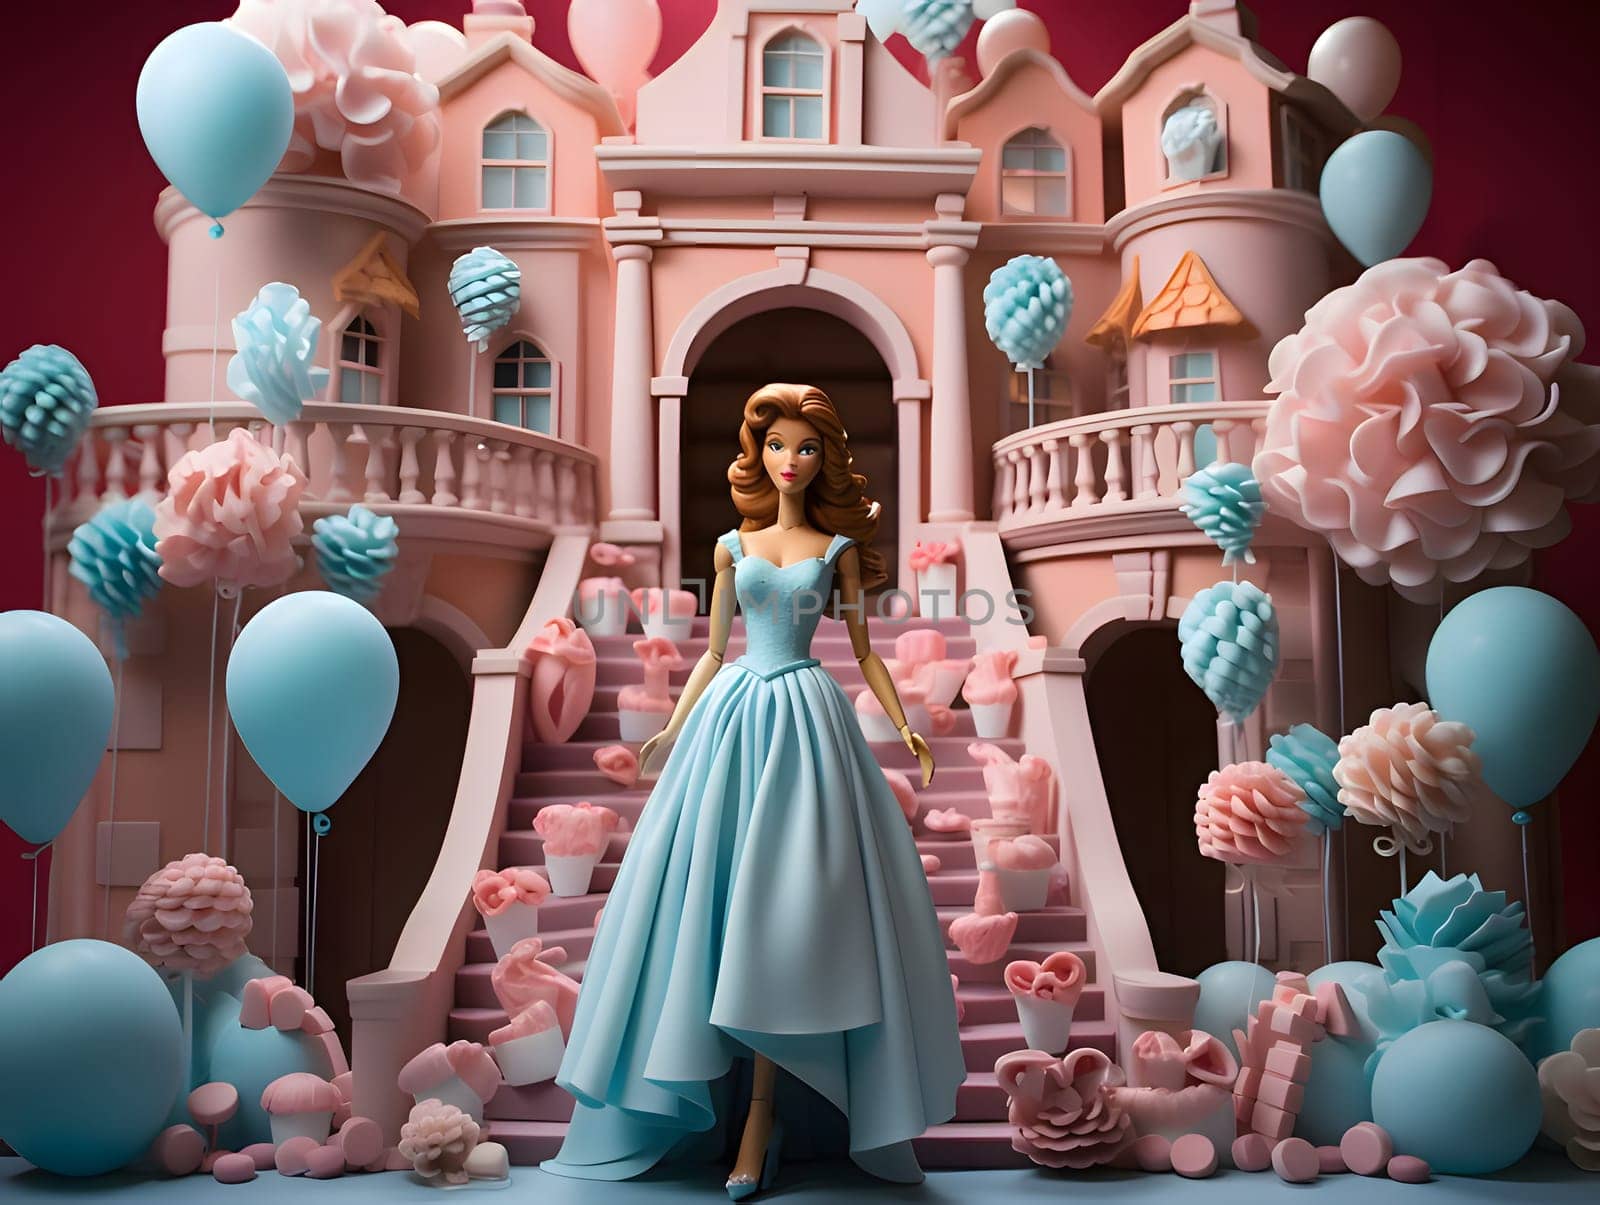 A brown-haired Barbie doll is elegantly dressed in a blue long dress, standing against the backdrop of a pink and blue castle, creating a magical scene.